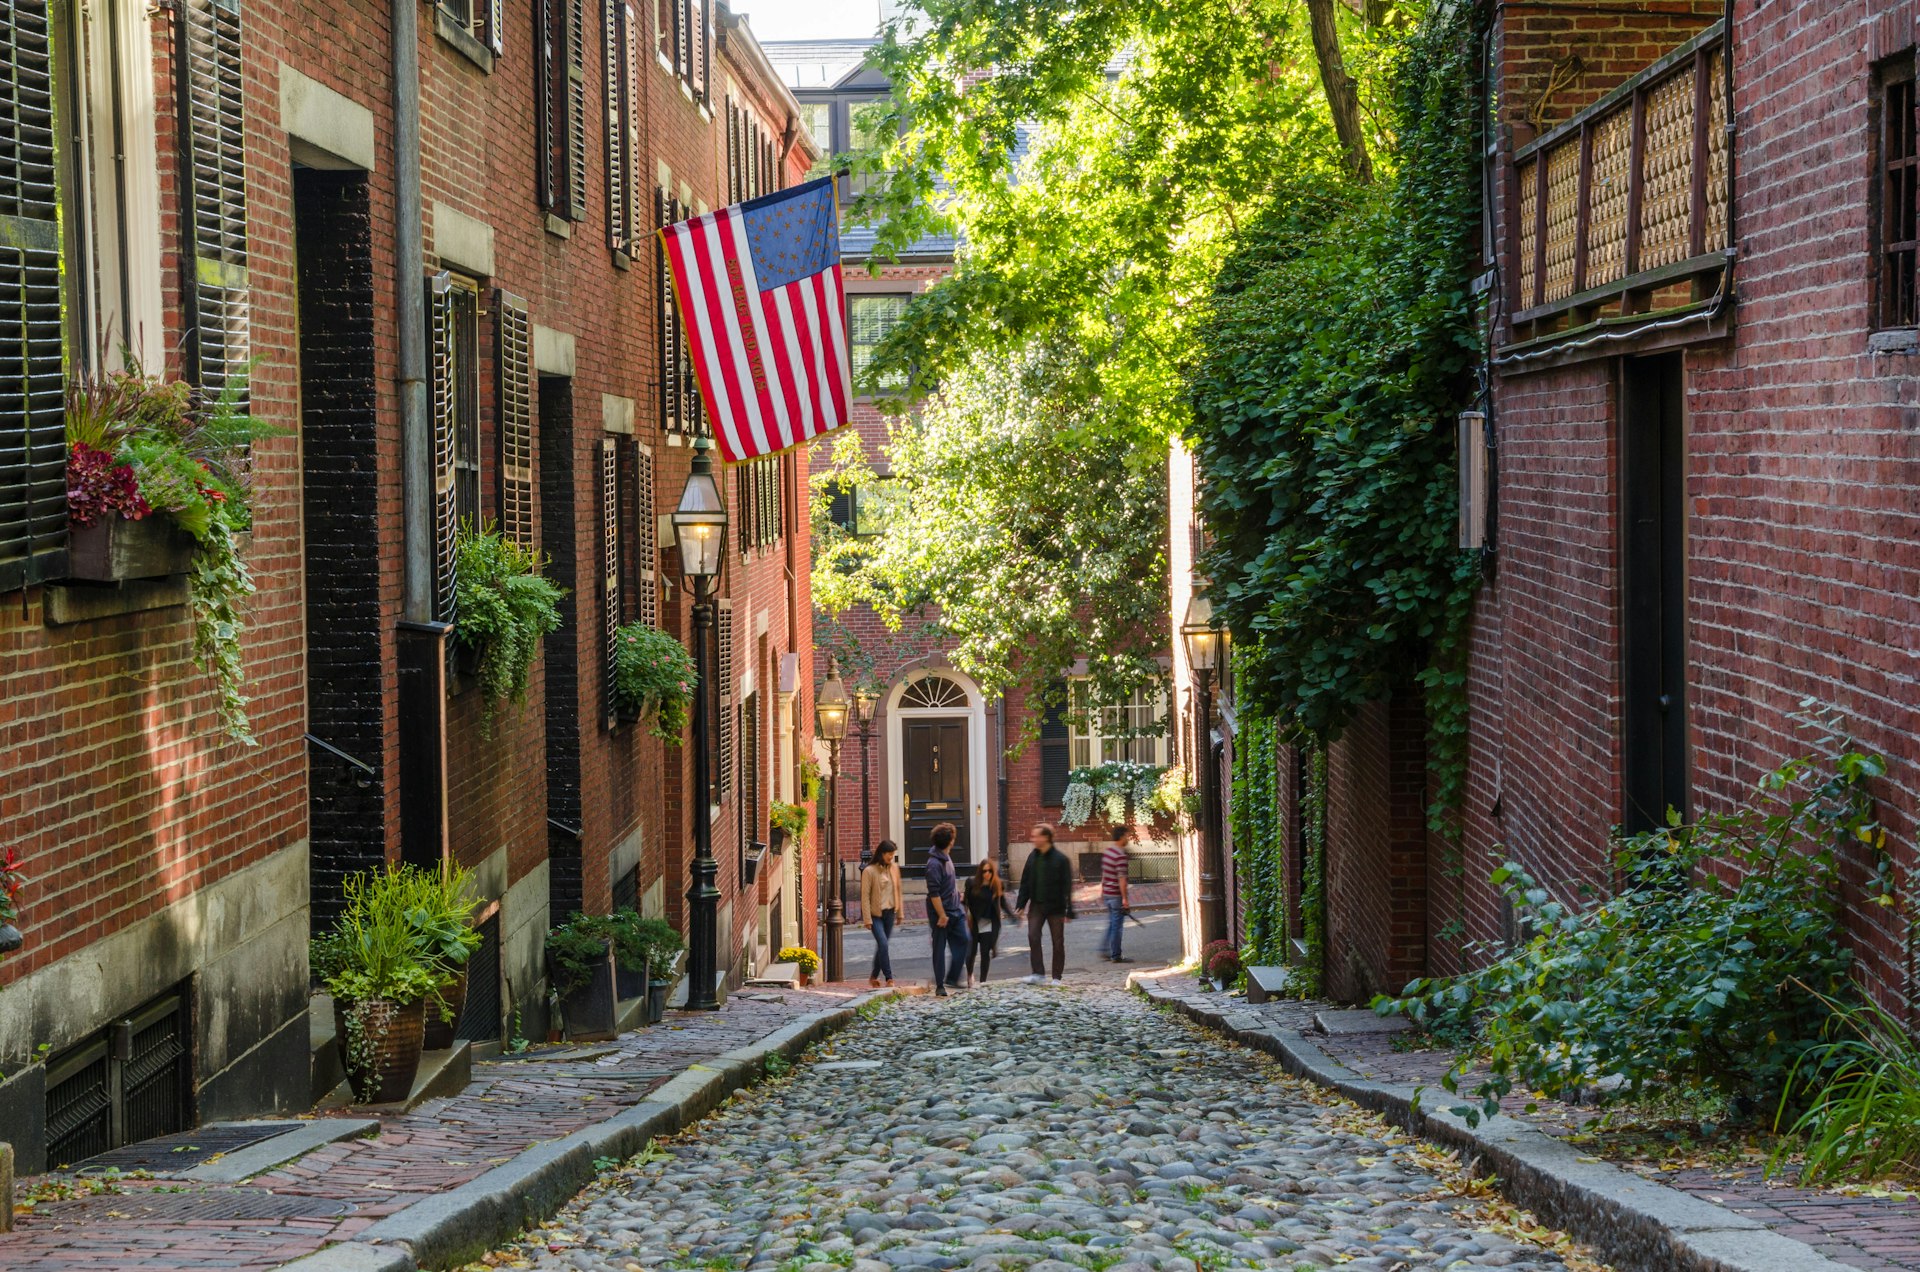 A narrow cobbled street lined with historic buildings. One has a large American flag flying outside it